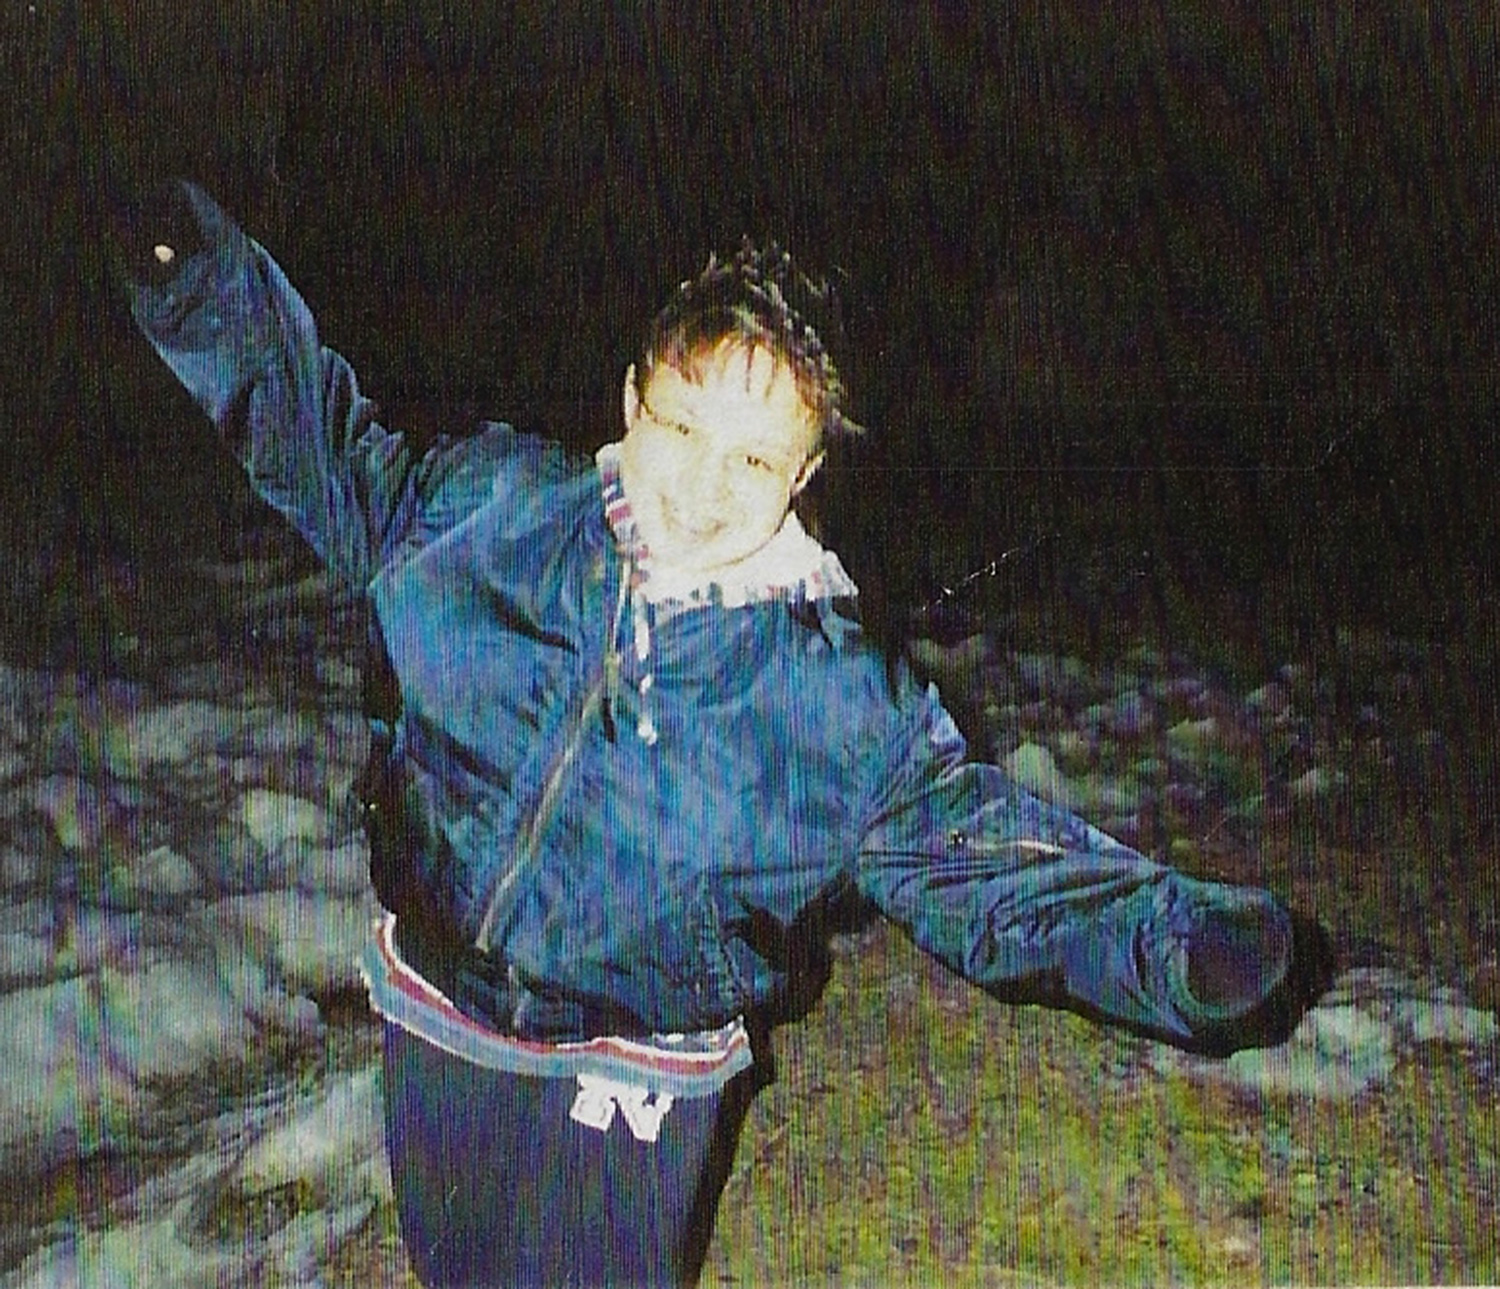 PHOTO: Sophie Sergie is pictured in a photo released by the Alaska State Troopers with an announcement that an arrest has been made in conjunction with her 1993 murder in Fairbanks, Alaska.